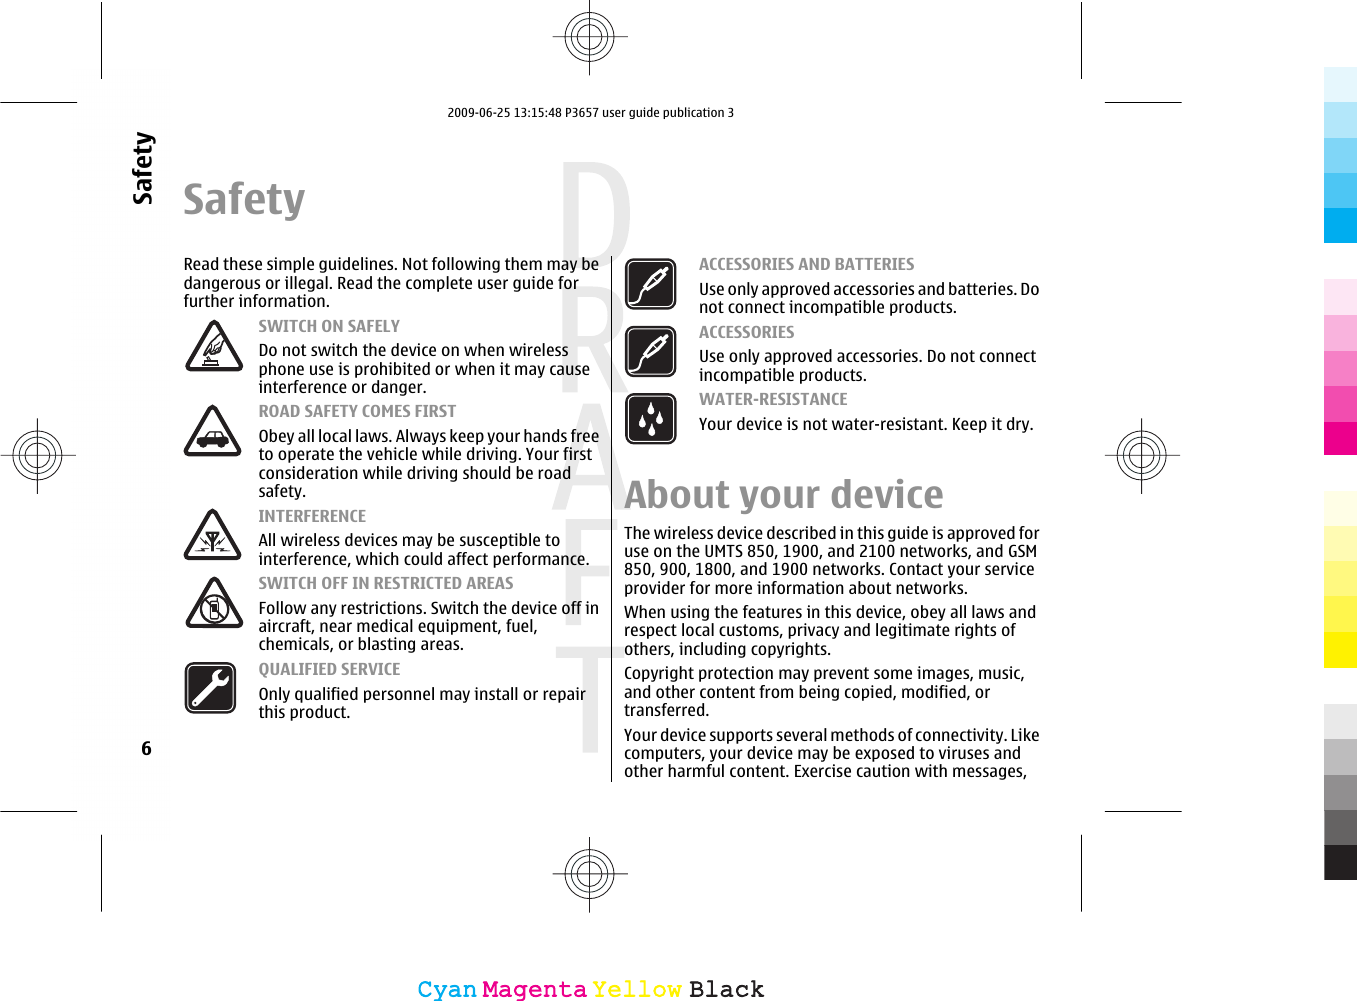 SafetyRead these simple guidelines. Not following them may bedangerous or illegal. Read the complete user guide forfurther information.SWITCH ON SAFELYDo not switch the device on when wirelessphone use is prohibited or when it may causeinterference or danger.ROAD SAFETY COMES FIRSTObey all local laws. Always keep your hands freeto operate the vehicle while driving. Your firstconsideration while driving should be roadsafety.INTERFERENCEAll wireless devices may be susceptible tointerference, which could affect performance.SWITCH OFF IN RESTRICTED AREASFollow any restrictions. Switch the device off inaircraft, near medical equipment, fuel,chemicals, or blasting areas.QUALIFIED SERVICEOnly qualified personnel may install or repairthis product.ACCESSORIES AND BATTERIESUse only approved accessories and batteries. Donot connect incompatible products.ACCESSORIESUse only approved accessories. Do not connectincompatible products.WATER-RESISTANCEYour device is not water-resistant. Keep it dry.About your deviceThe wireless device described in this guide is approved foruse on the UMTS 850, 1900, and 2100 networks, and GSM850, 900, 1800, and 1900 networks. Contact your serviceprovider for more information about networks.When using the features in this device, obey all laws andrespect local customs, privacy and legitimate rights ofothers, including copyrights.Copyright protection may prevent some images, music,and other content from being copied, modified, ortransferred.Your device supports several methods of connectivity. Likecomputers, your device may be exposed to viruses andother harmful content. Exercise caution with messages,6SafetyCyanCyanMagentaMagentaYellowYellowBlackBlack2009-06-25 13:15:48 P3657 user guide publication 3